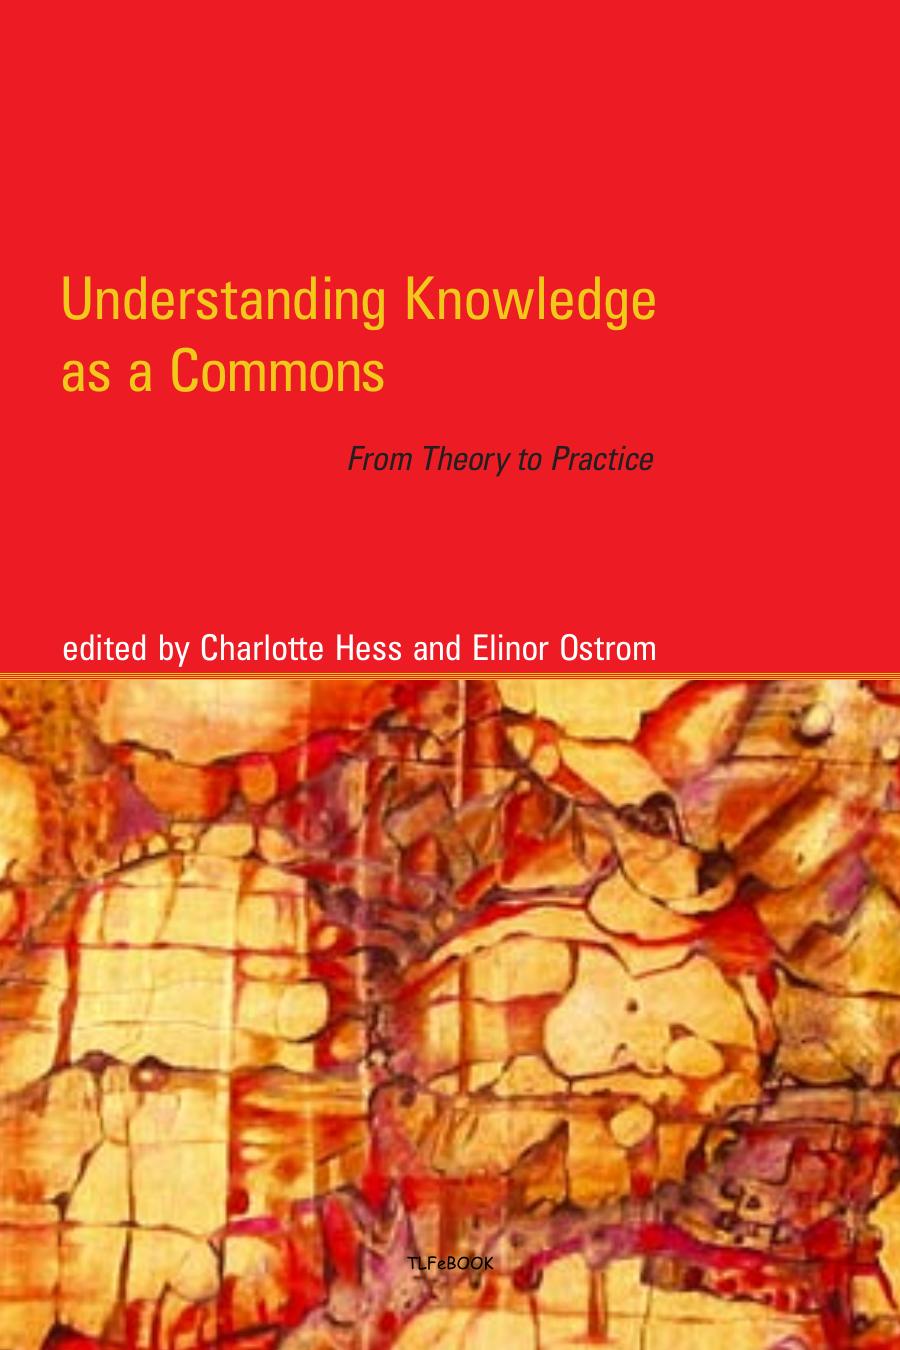 Understanding knowledge as a commons from theory to practice by Charlotte Hess (z-lib.org)